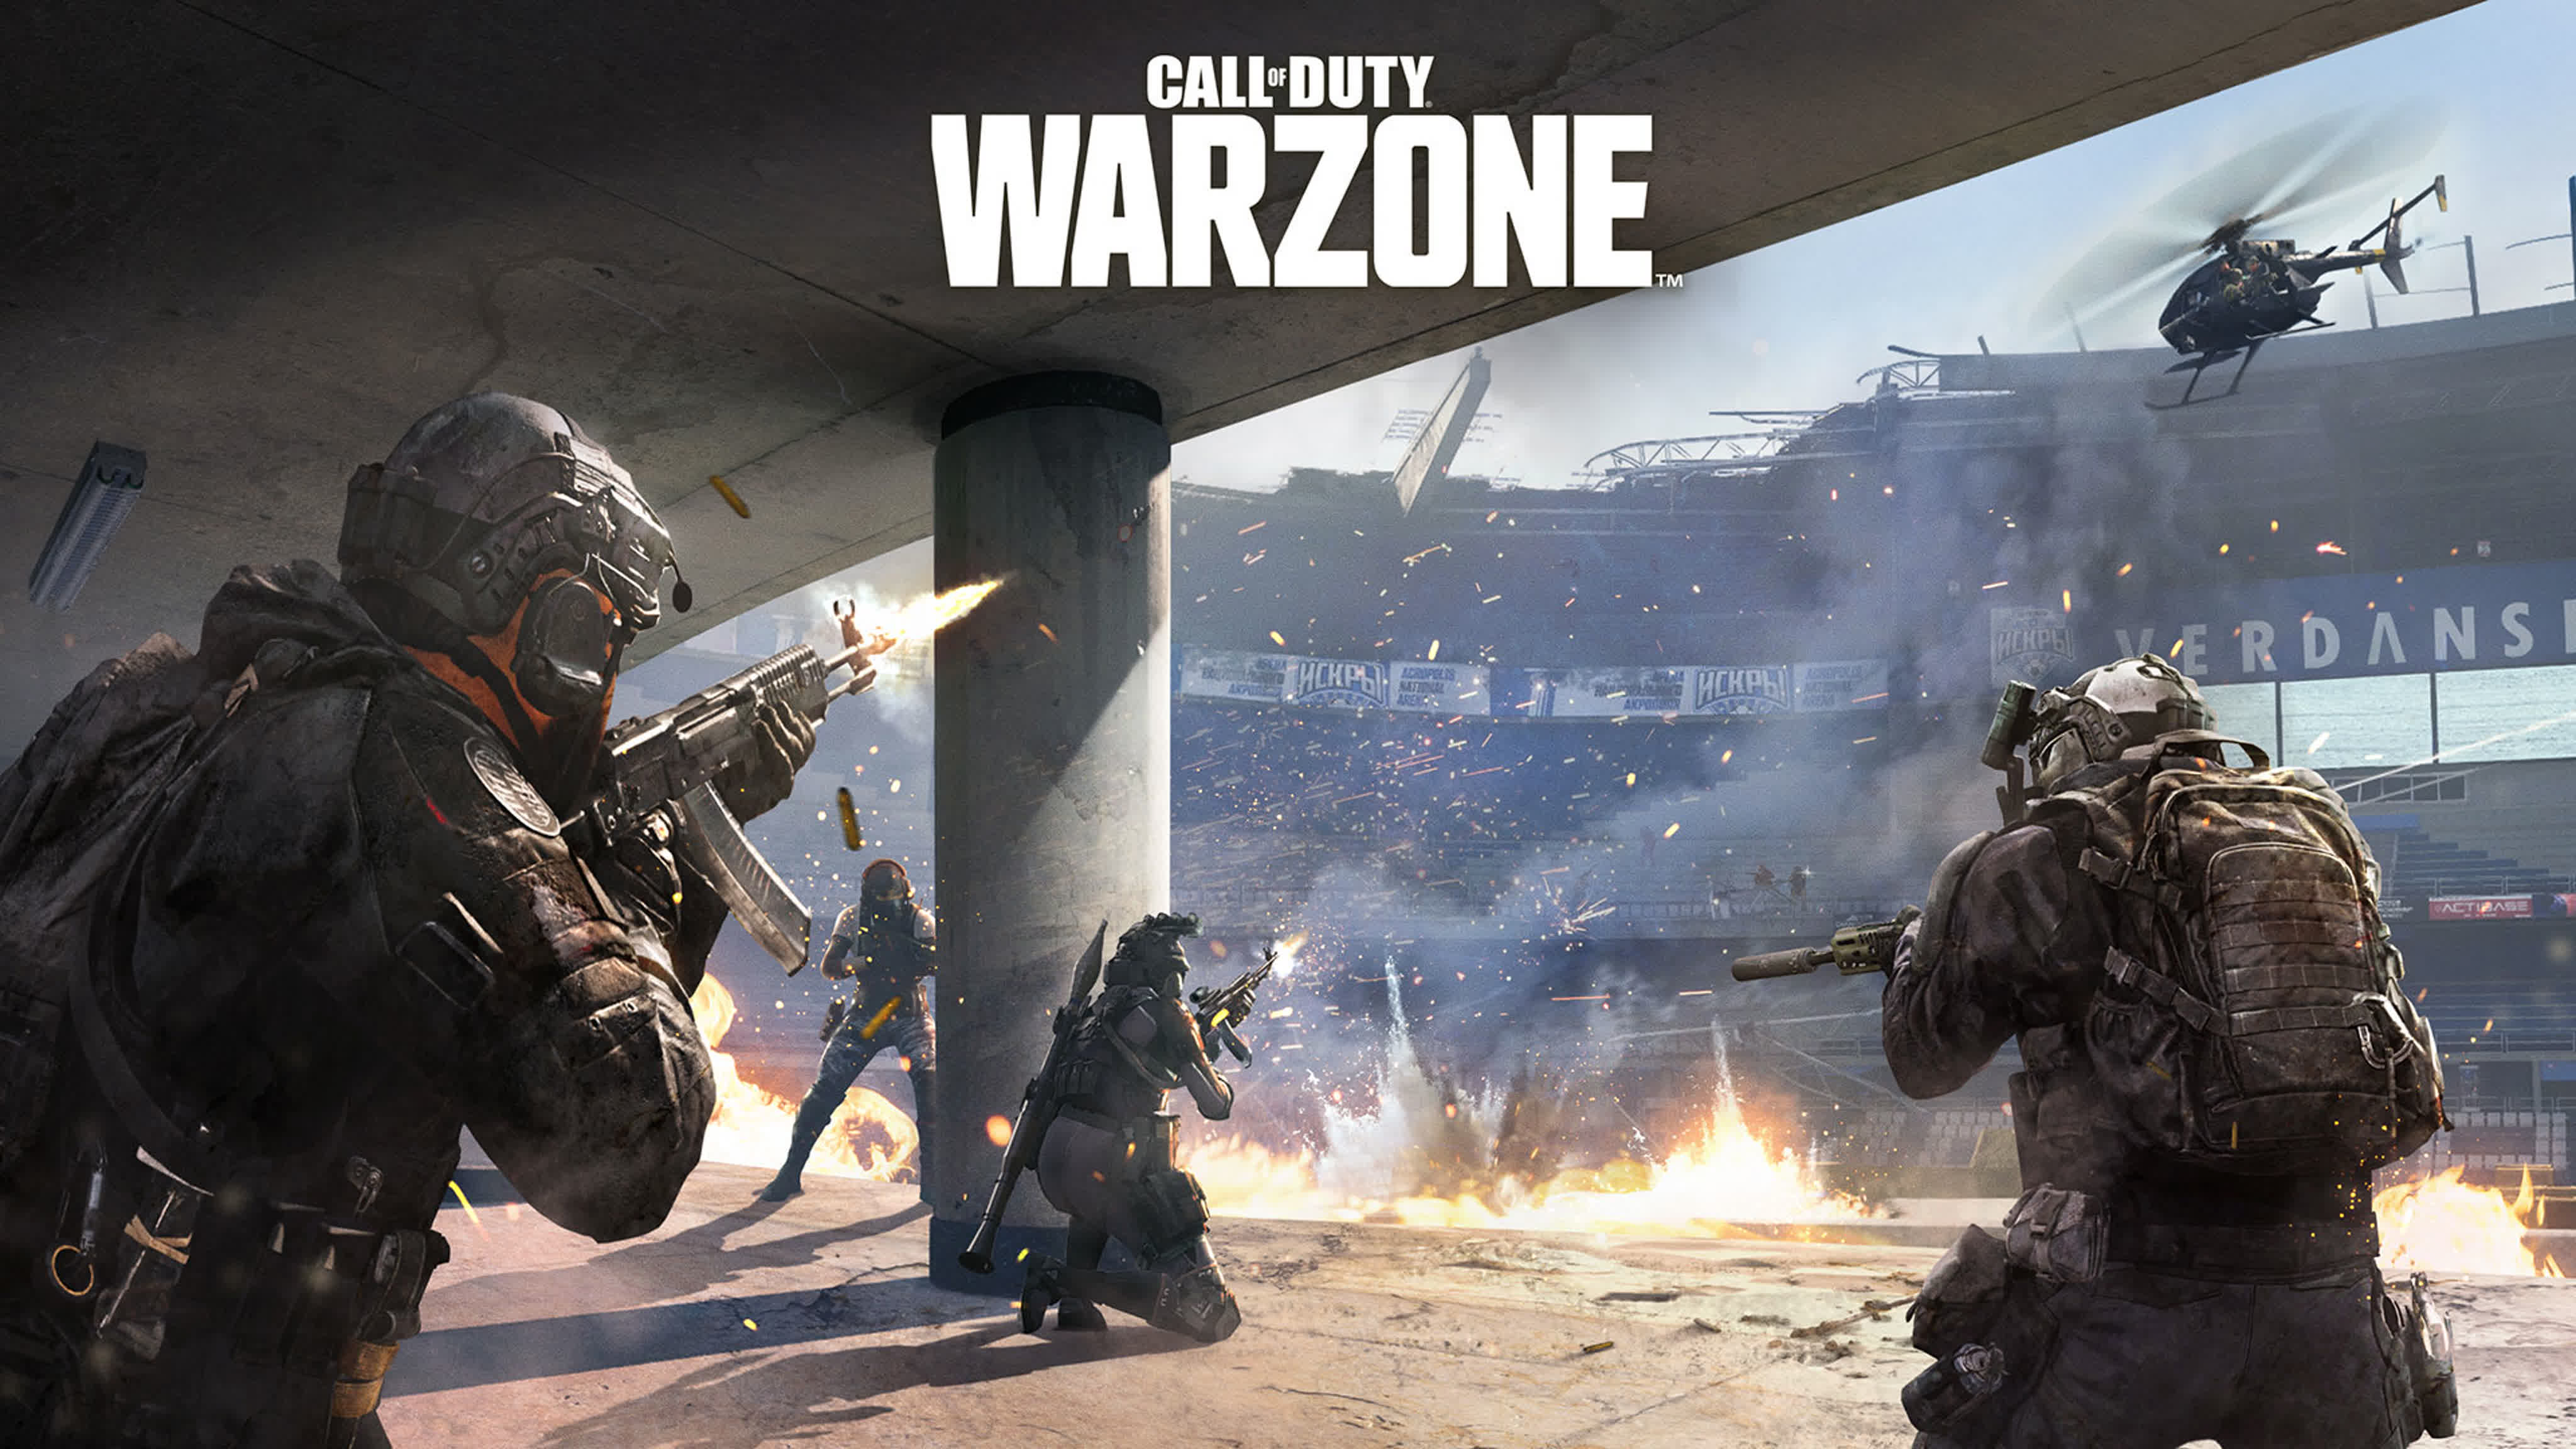 Call of Duty ®: Warzone ™.